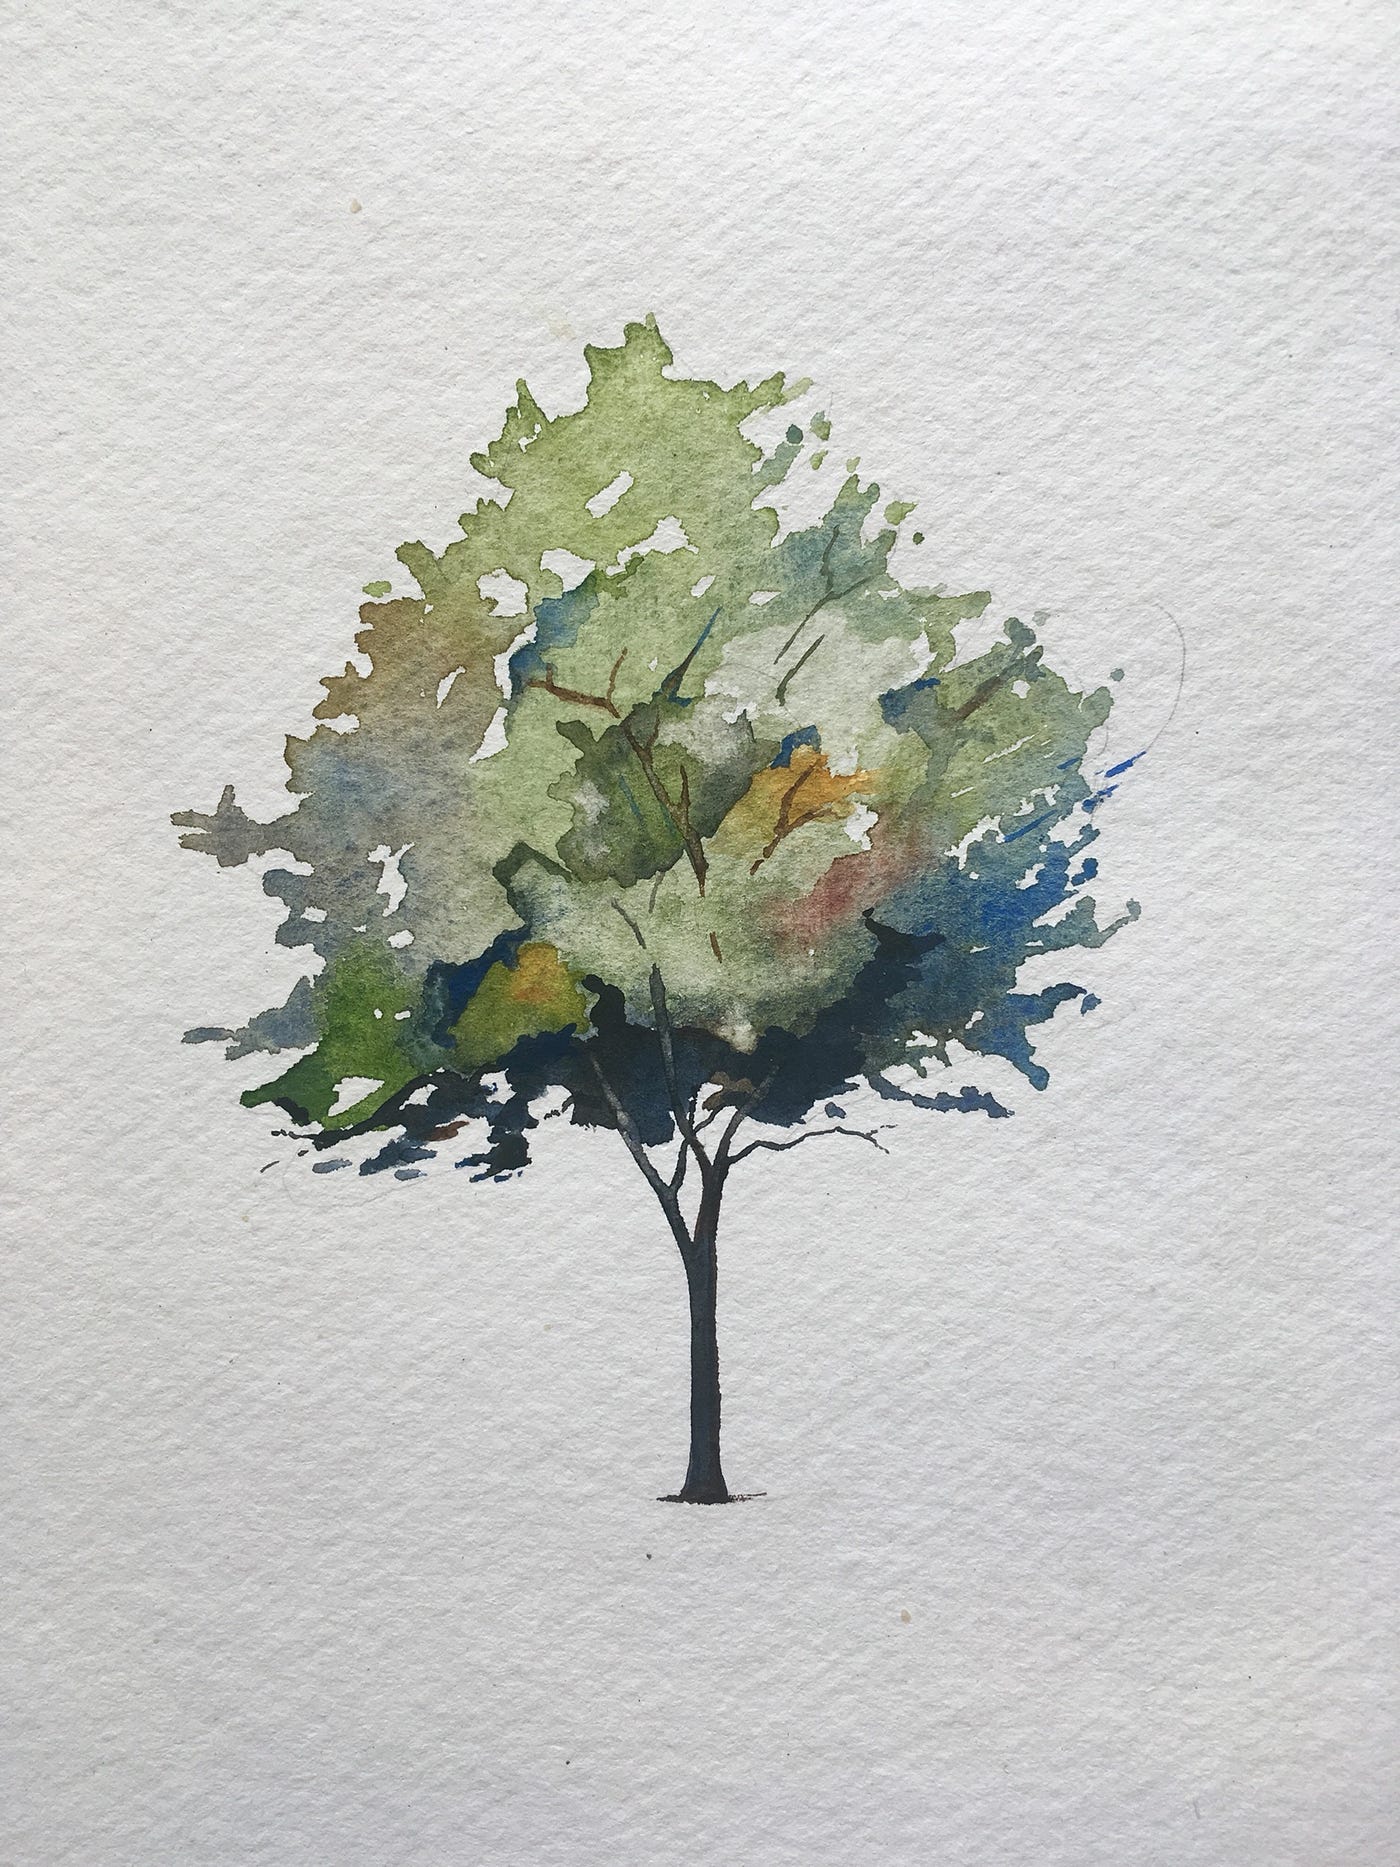 How To Paint A Tree In Watercolors, by Christopher P Jones, The Startup